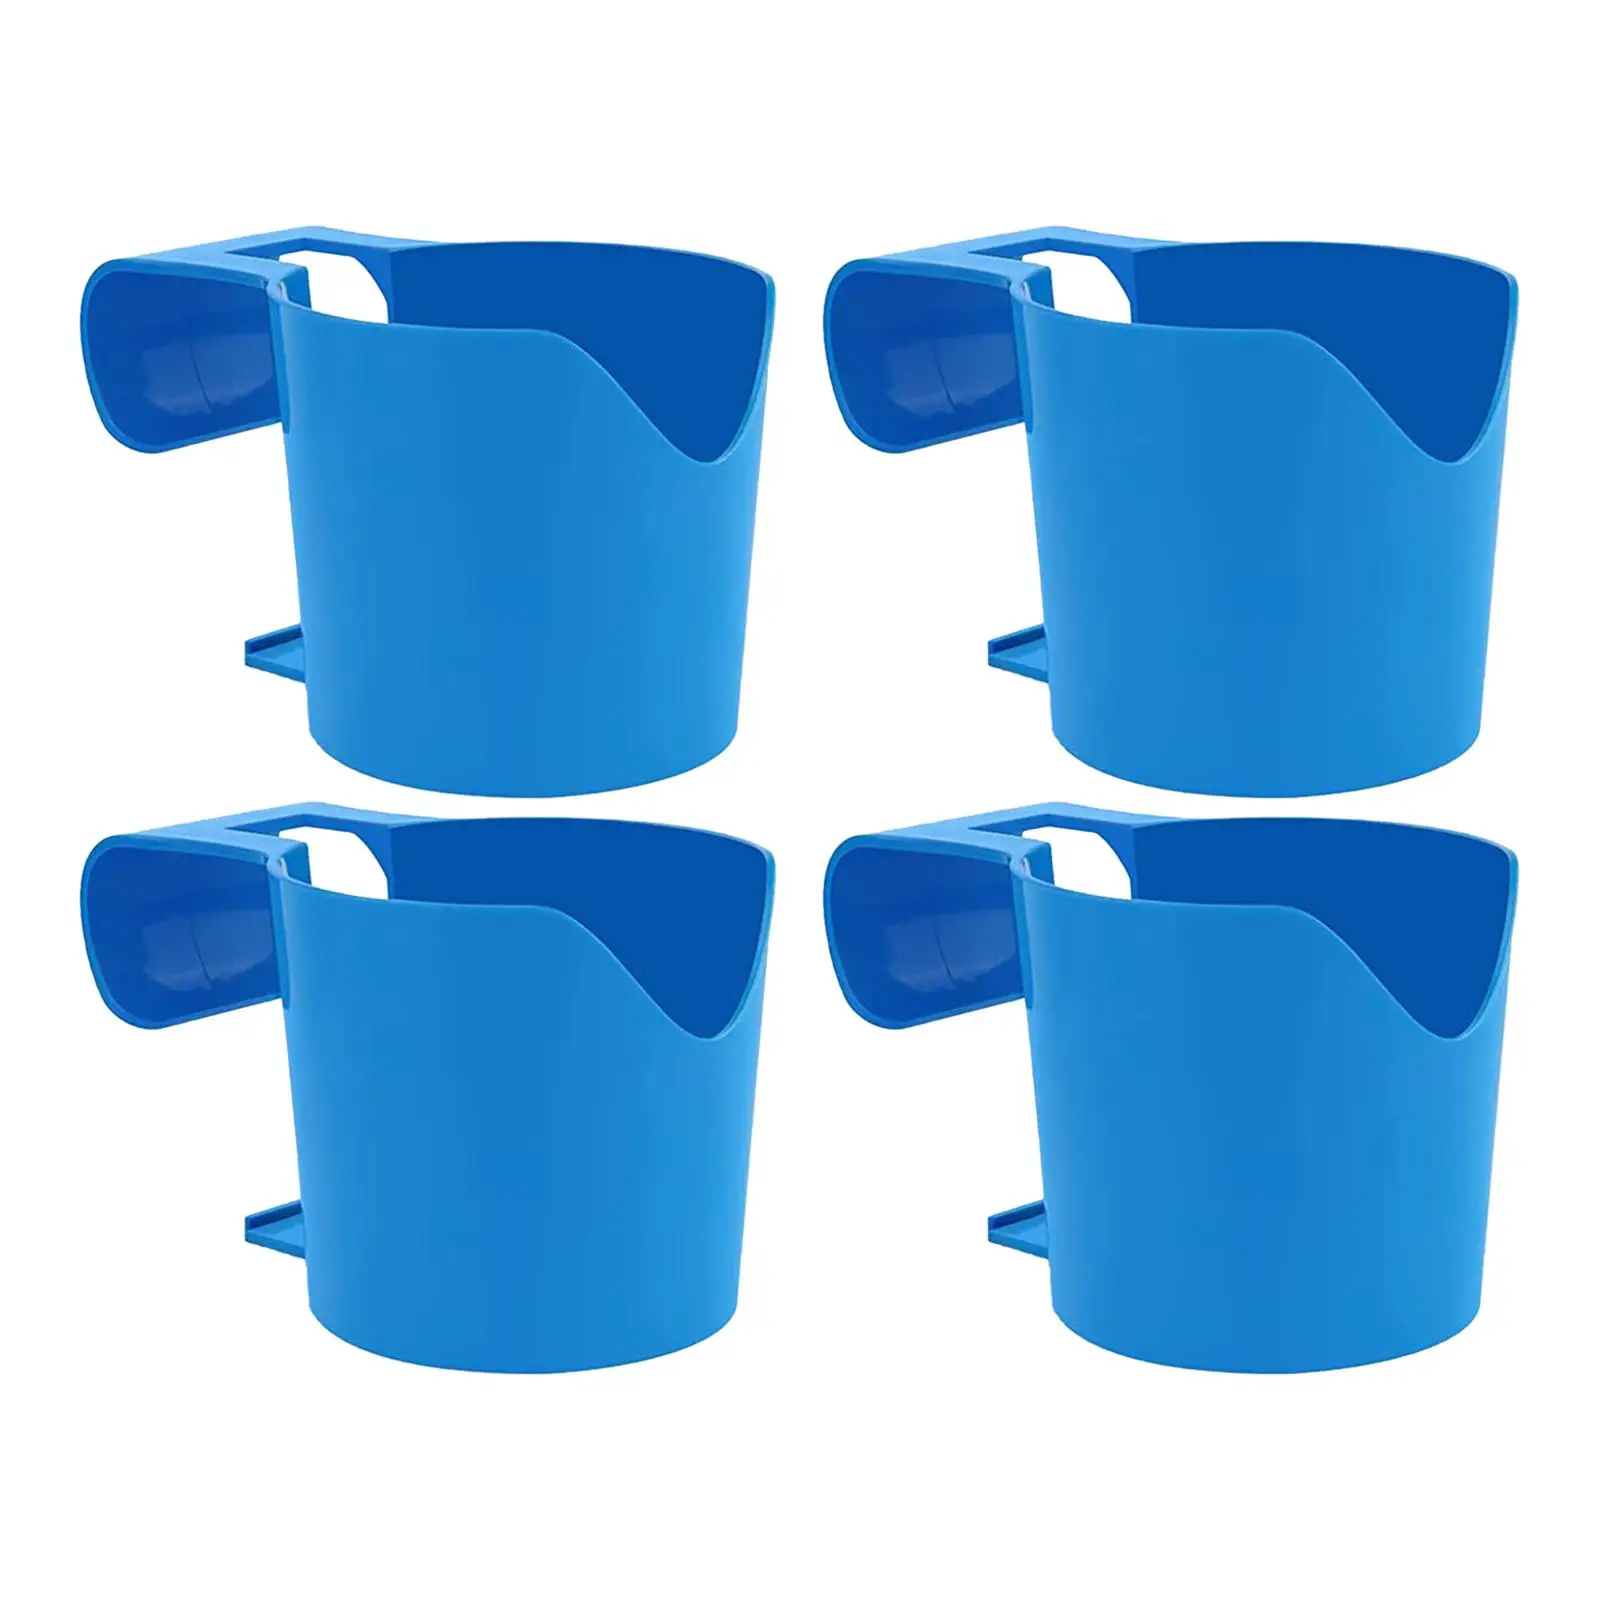 4x Poolside Cup Holders Multifunctional Pool Storage Shelf Pool Cup Holder for Inflatable Hot Tub Beverage Accessories